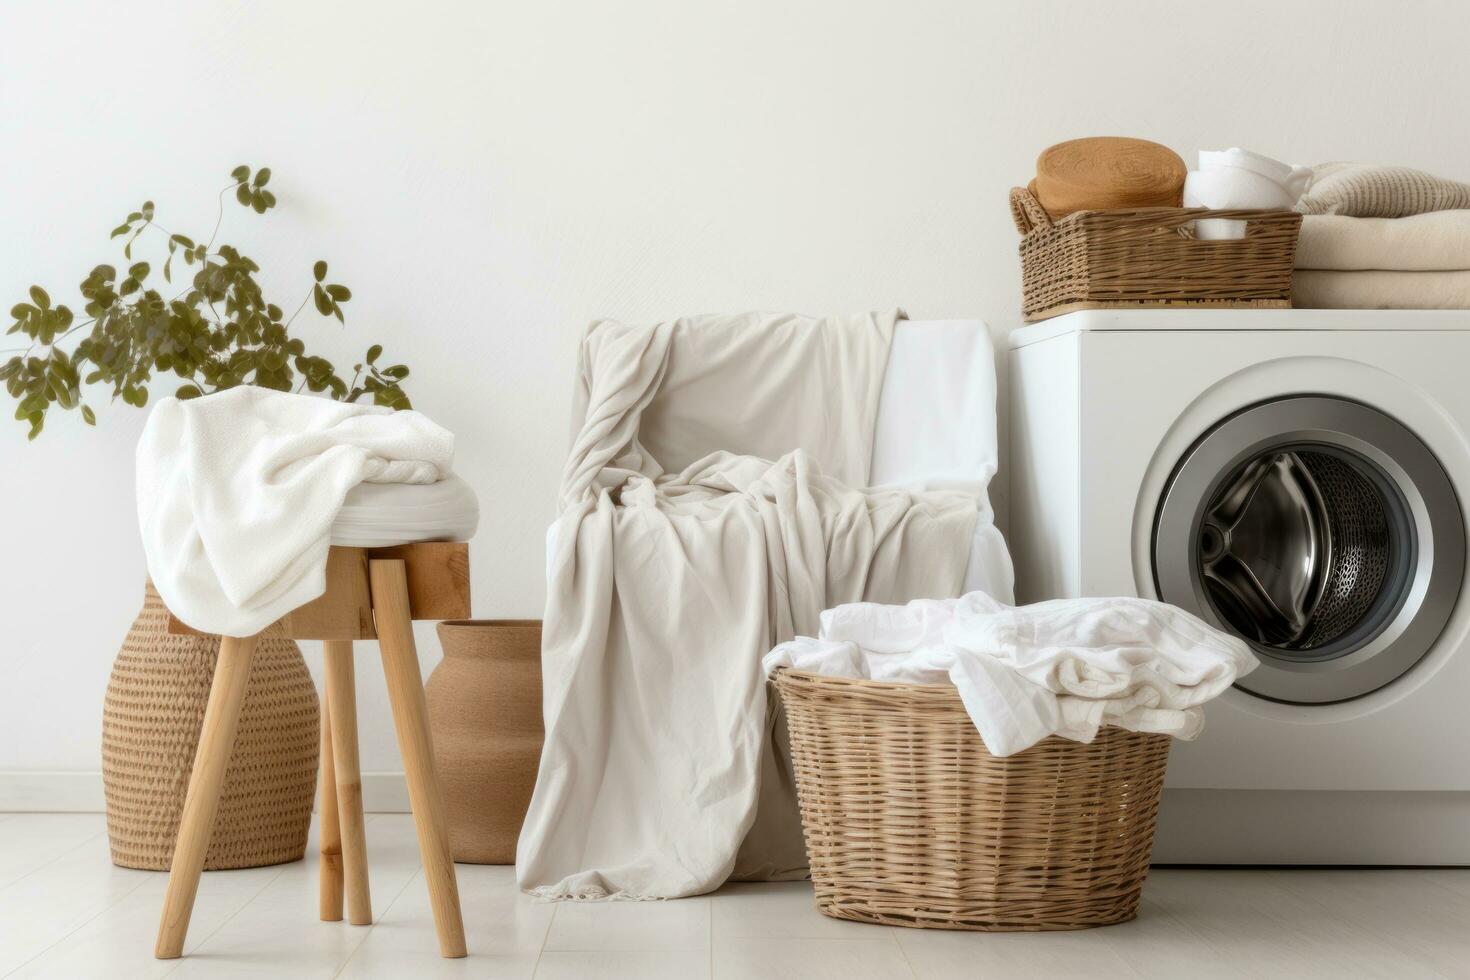 A laundry basket next to washing machine in a room photo